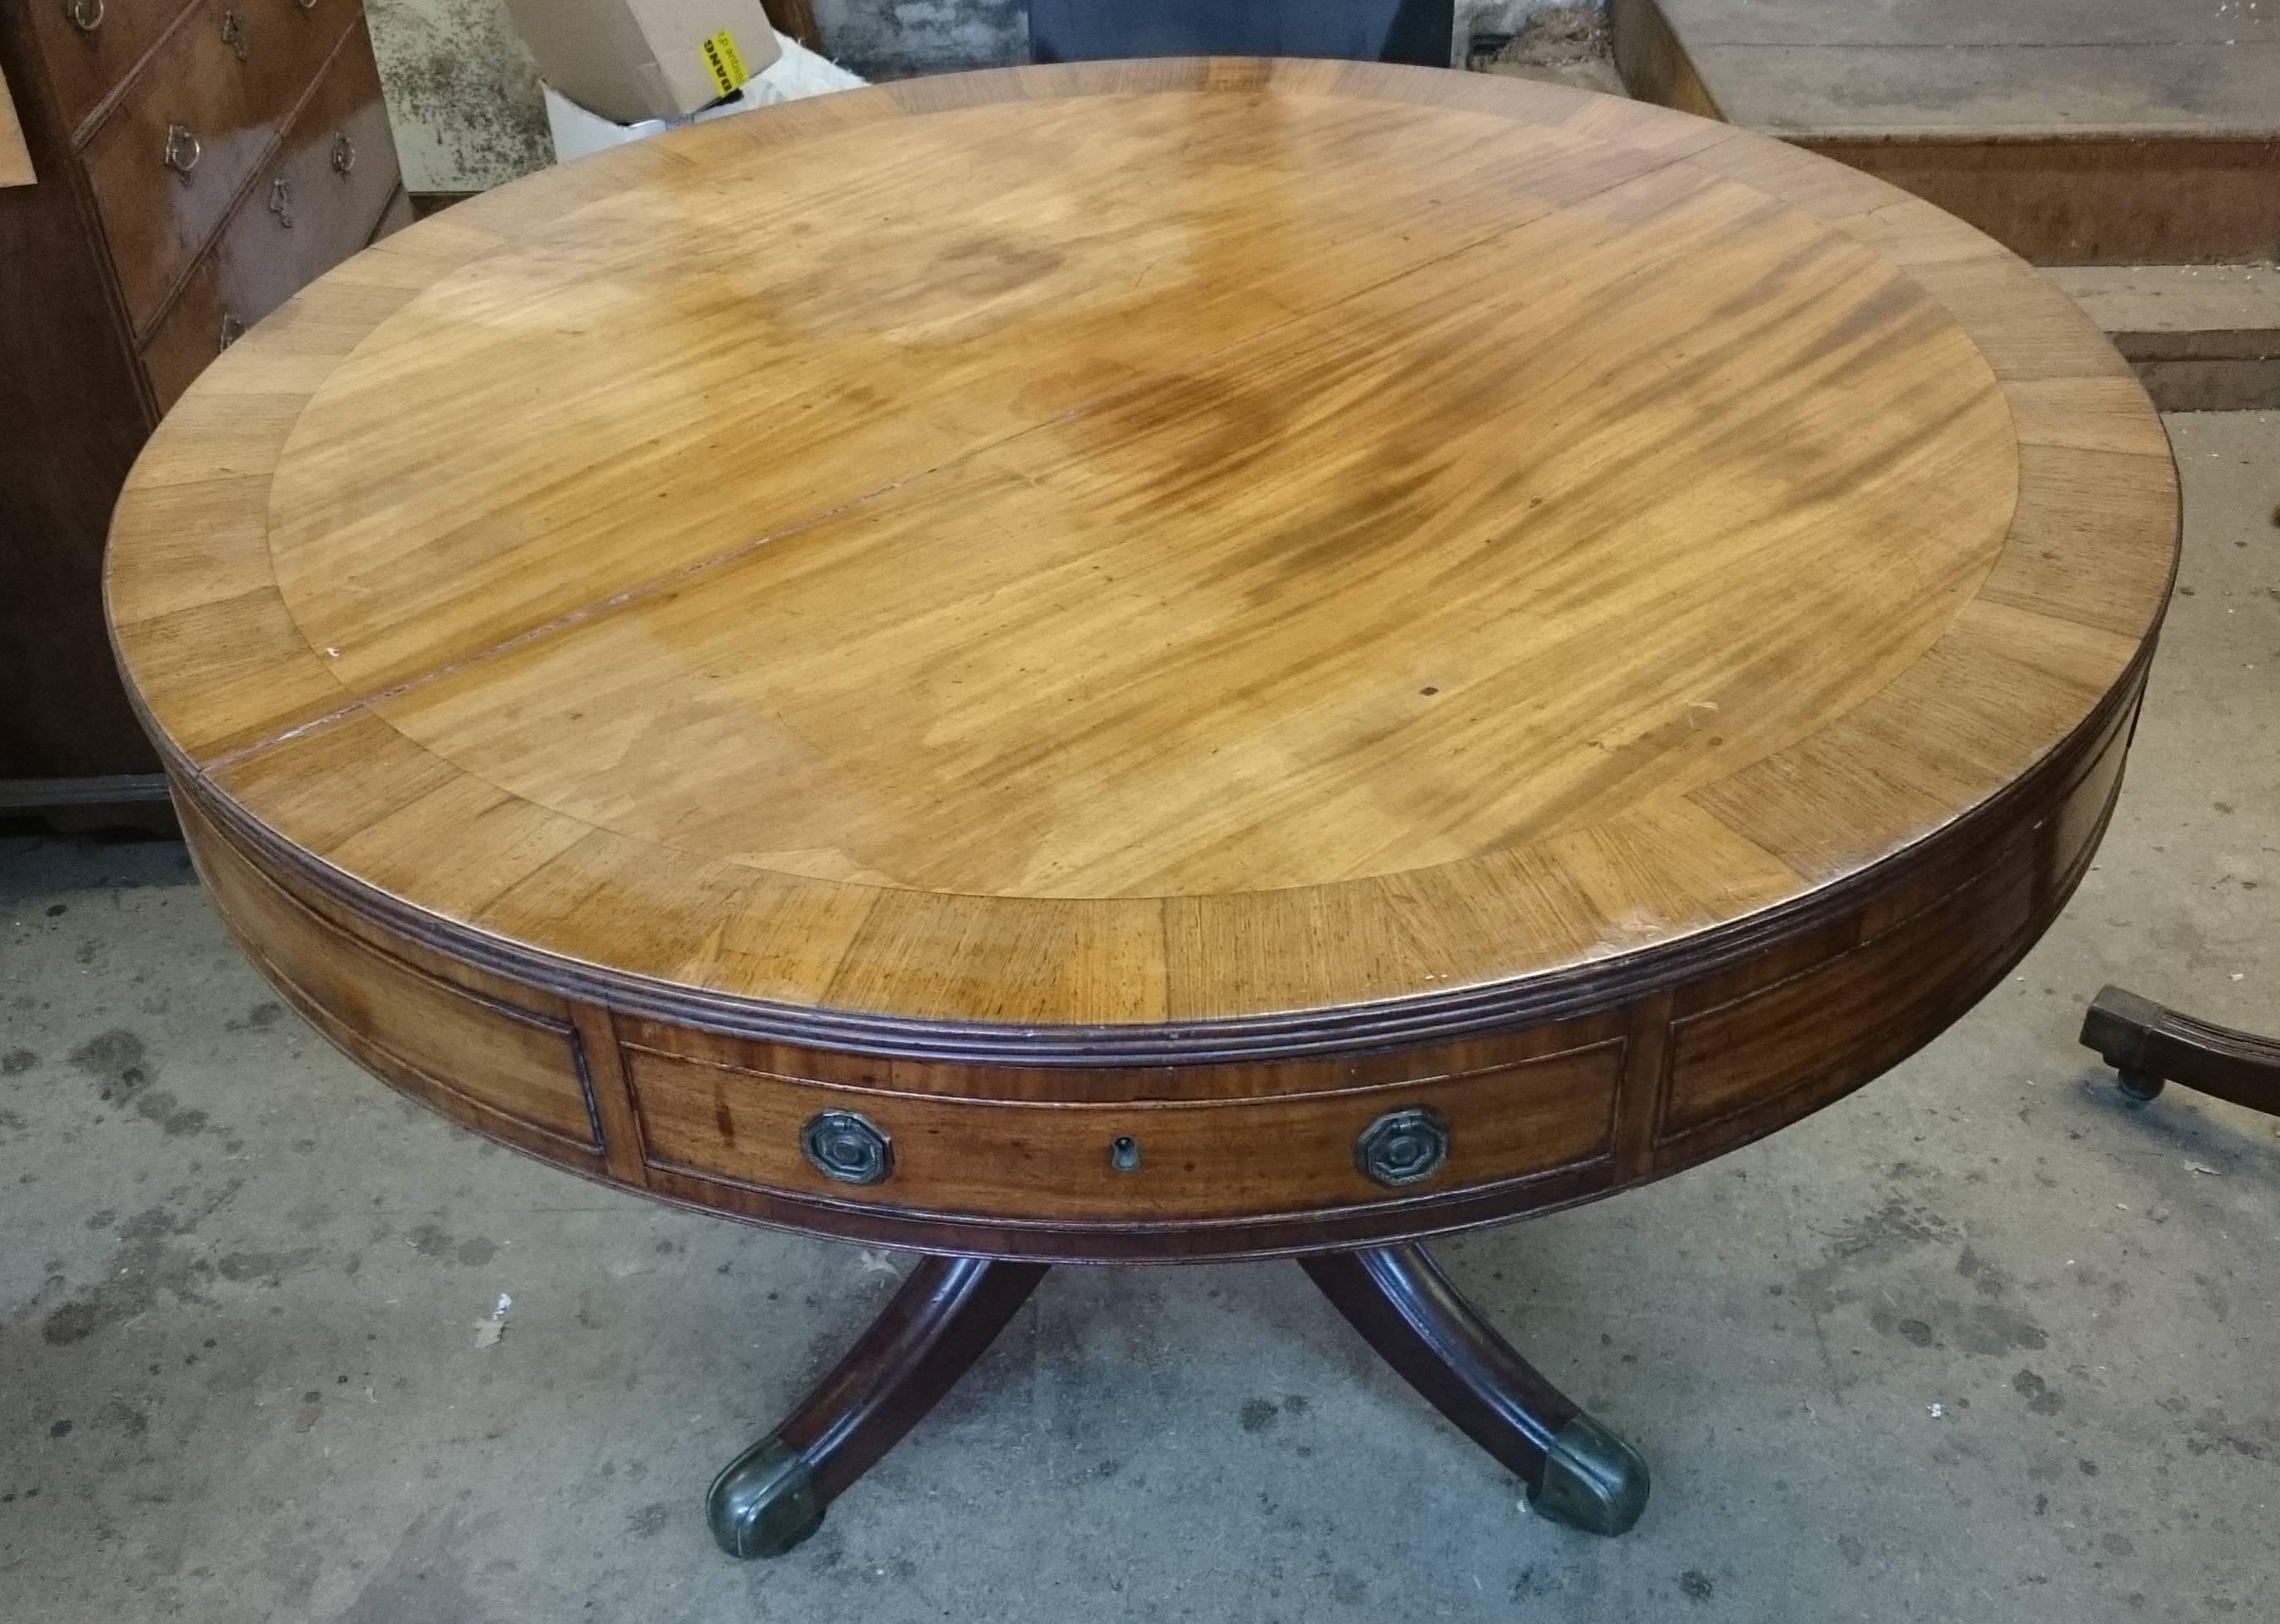 This is a very fine quality 18th century antique library 'drum' table. This library table has a rotating top which means lots of work spread over the writing surface can be accessed by simply spinning the top. The mahogany used to make this library